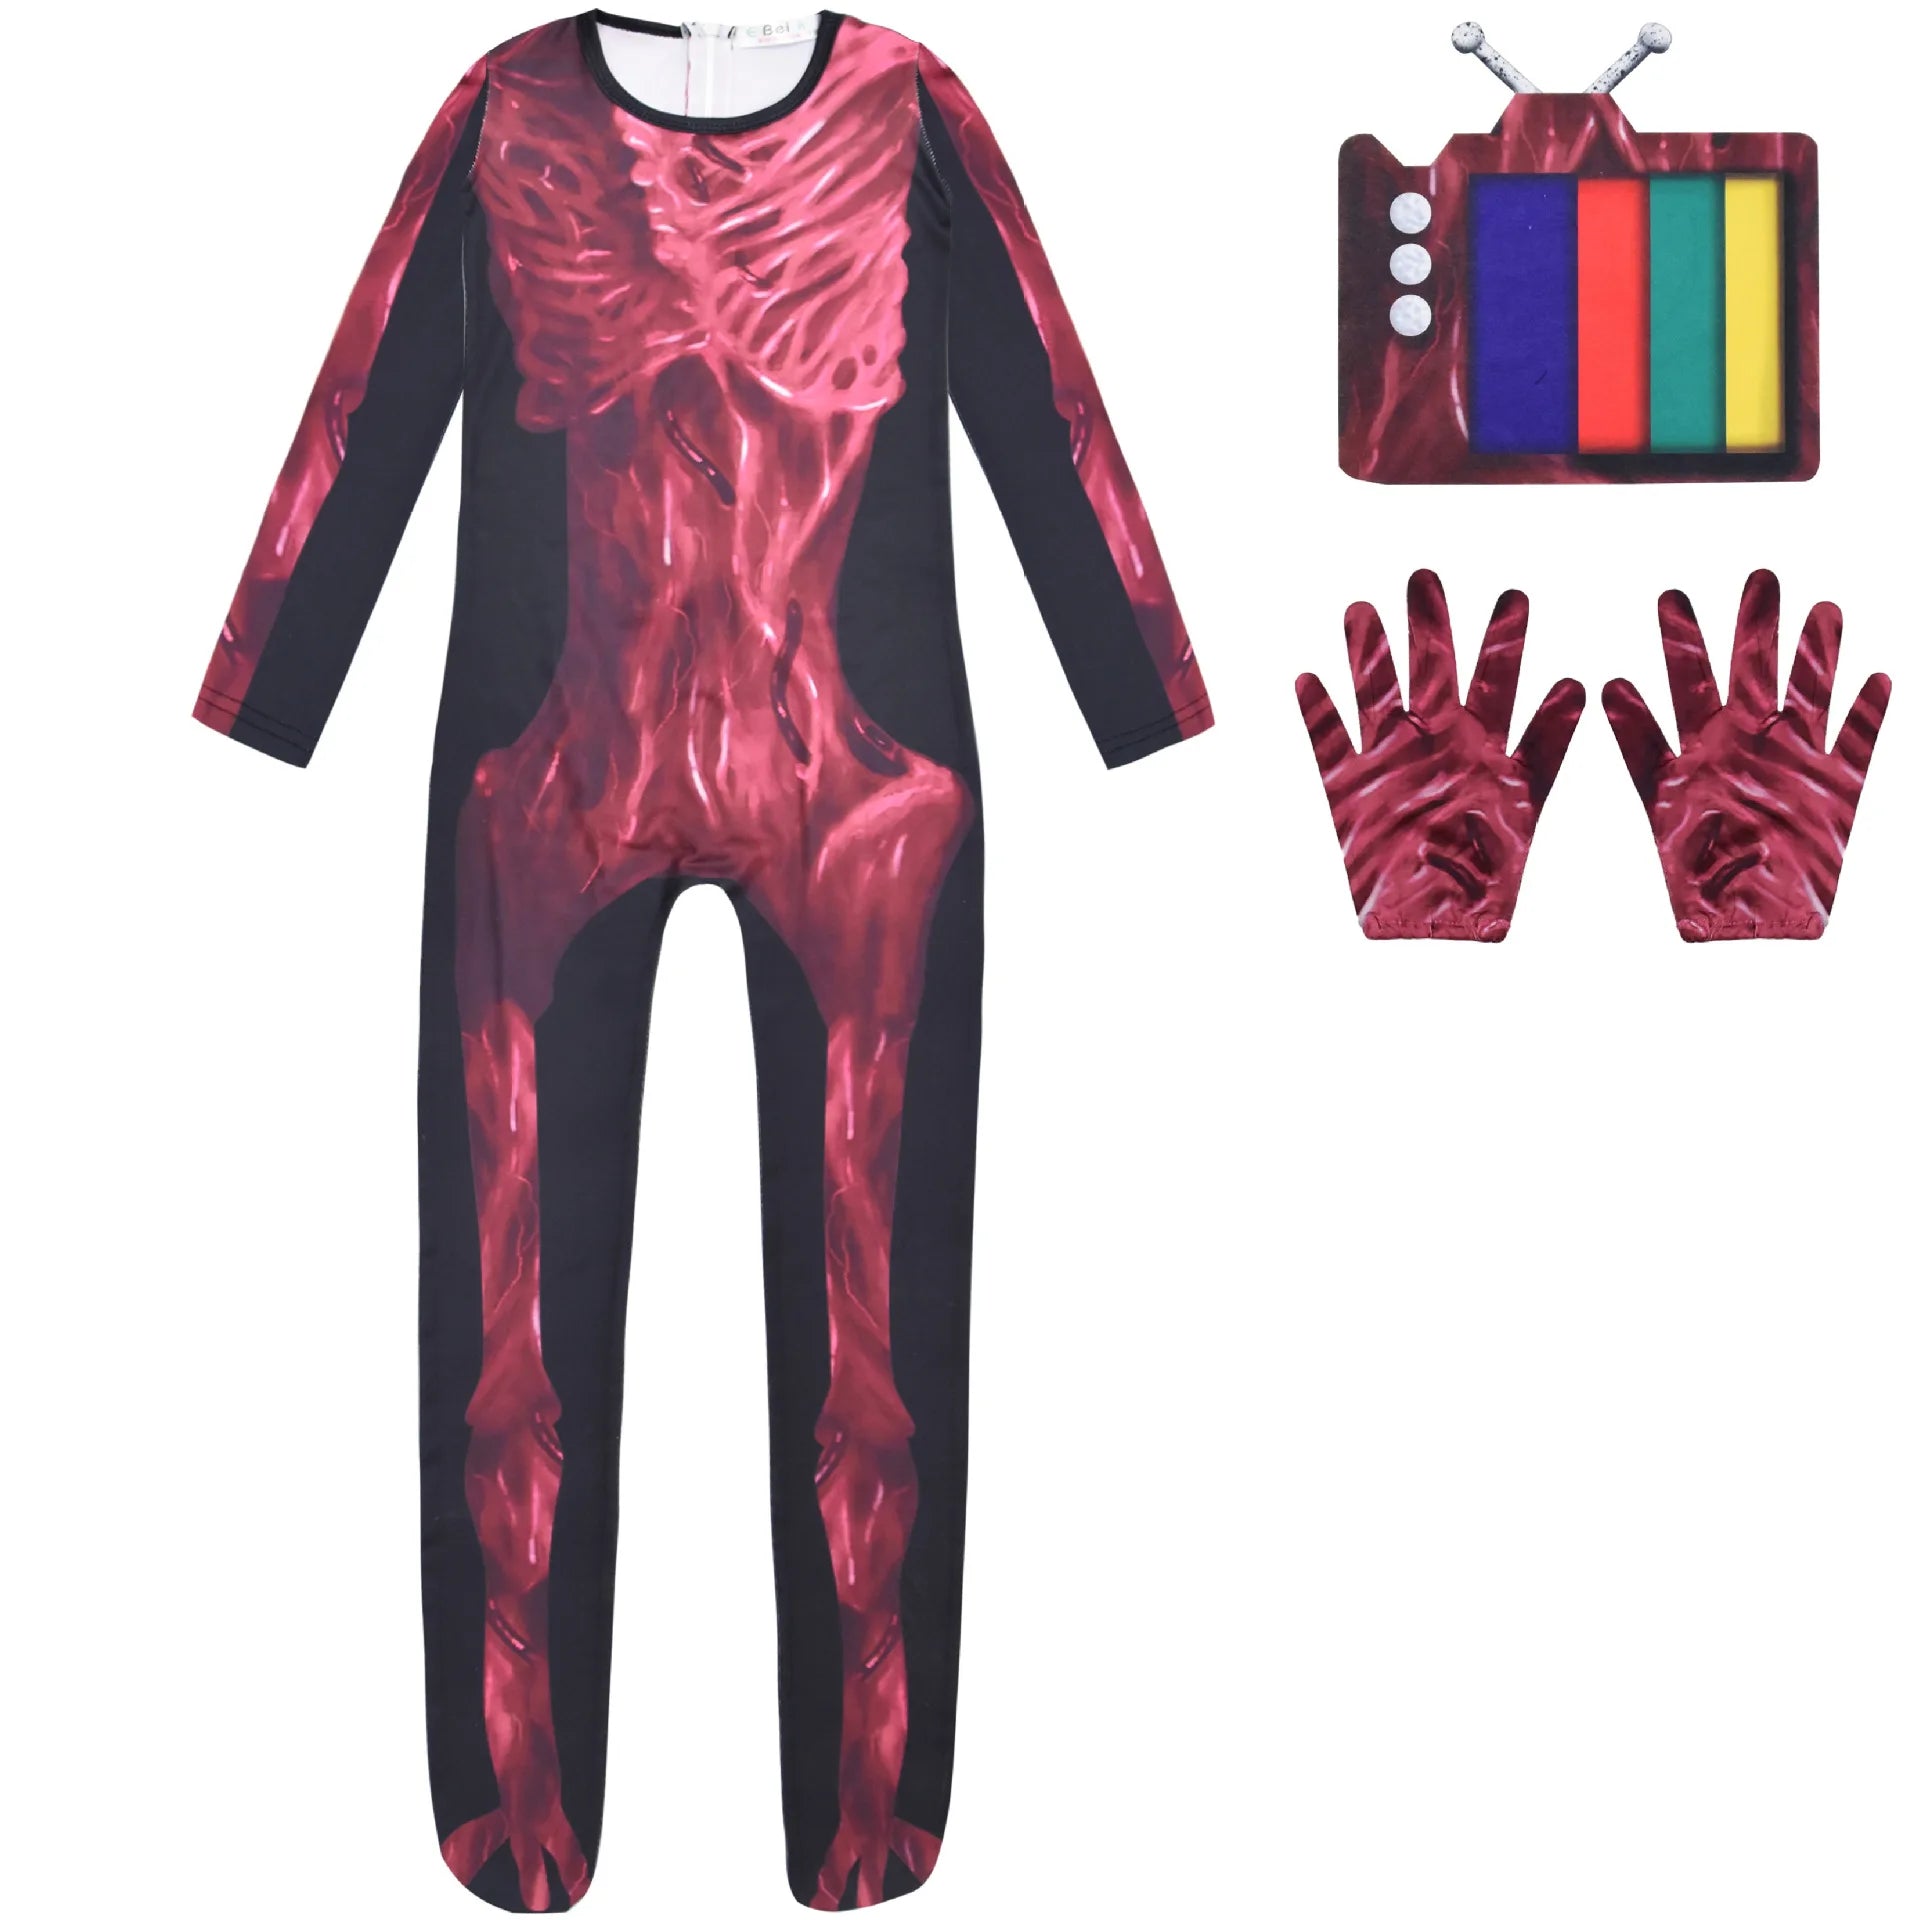 Kids Siren Head Cosplay Costume - Perfect for Boys and Girls, Suitable for Anime Funny Party Bodysuit, Halloween Carnival, and Fancy Dress Jumpsuits-168-120-Siren Head